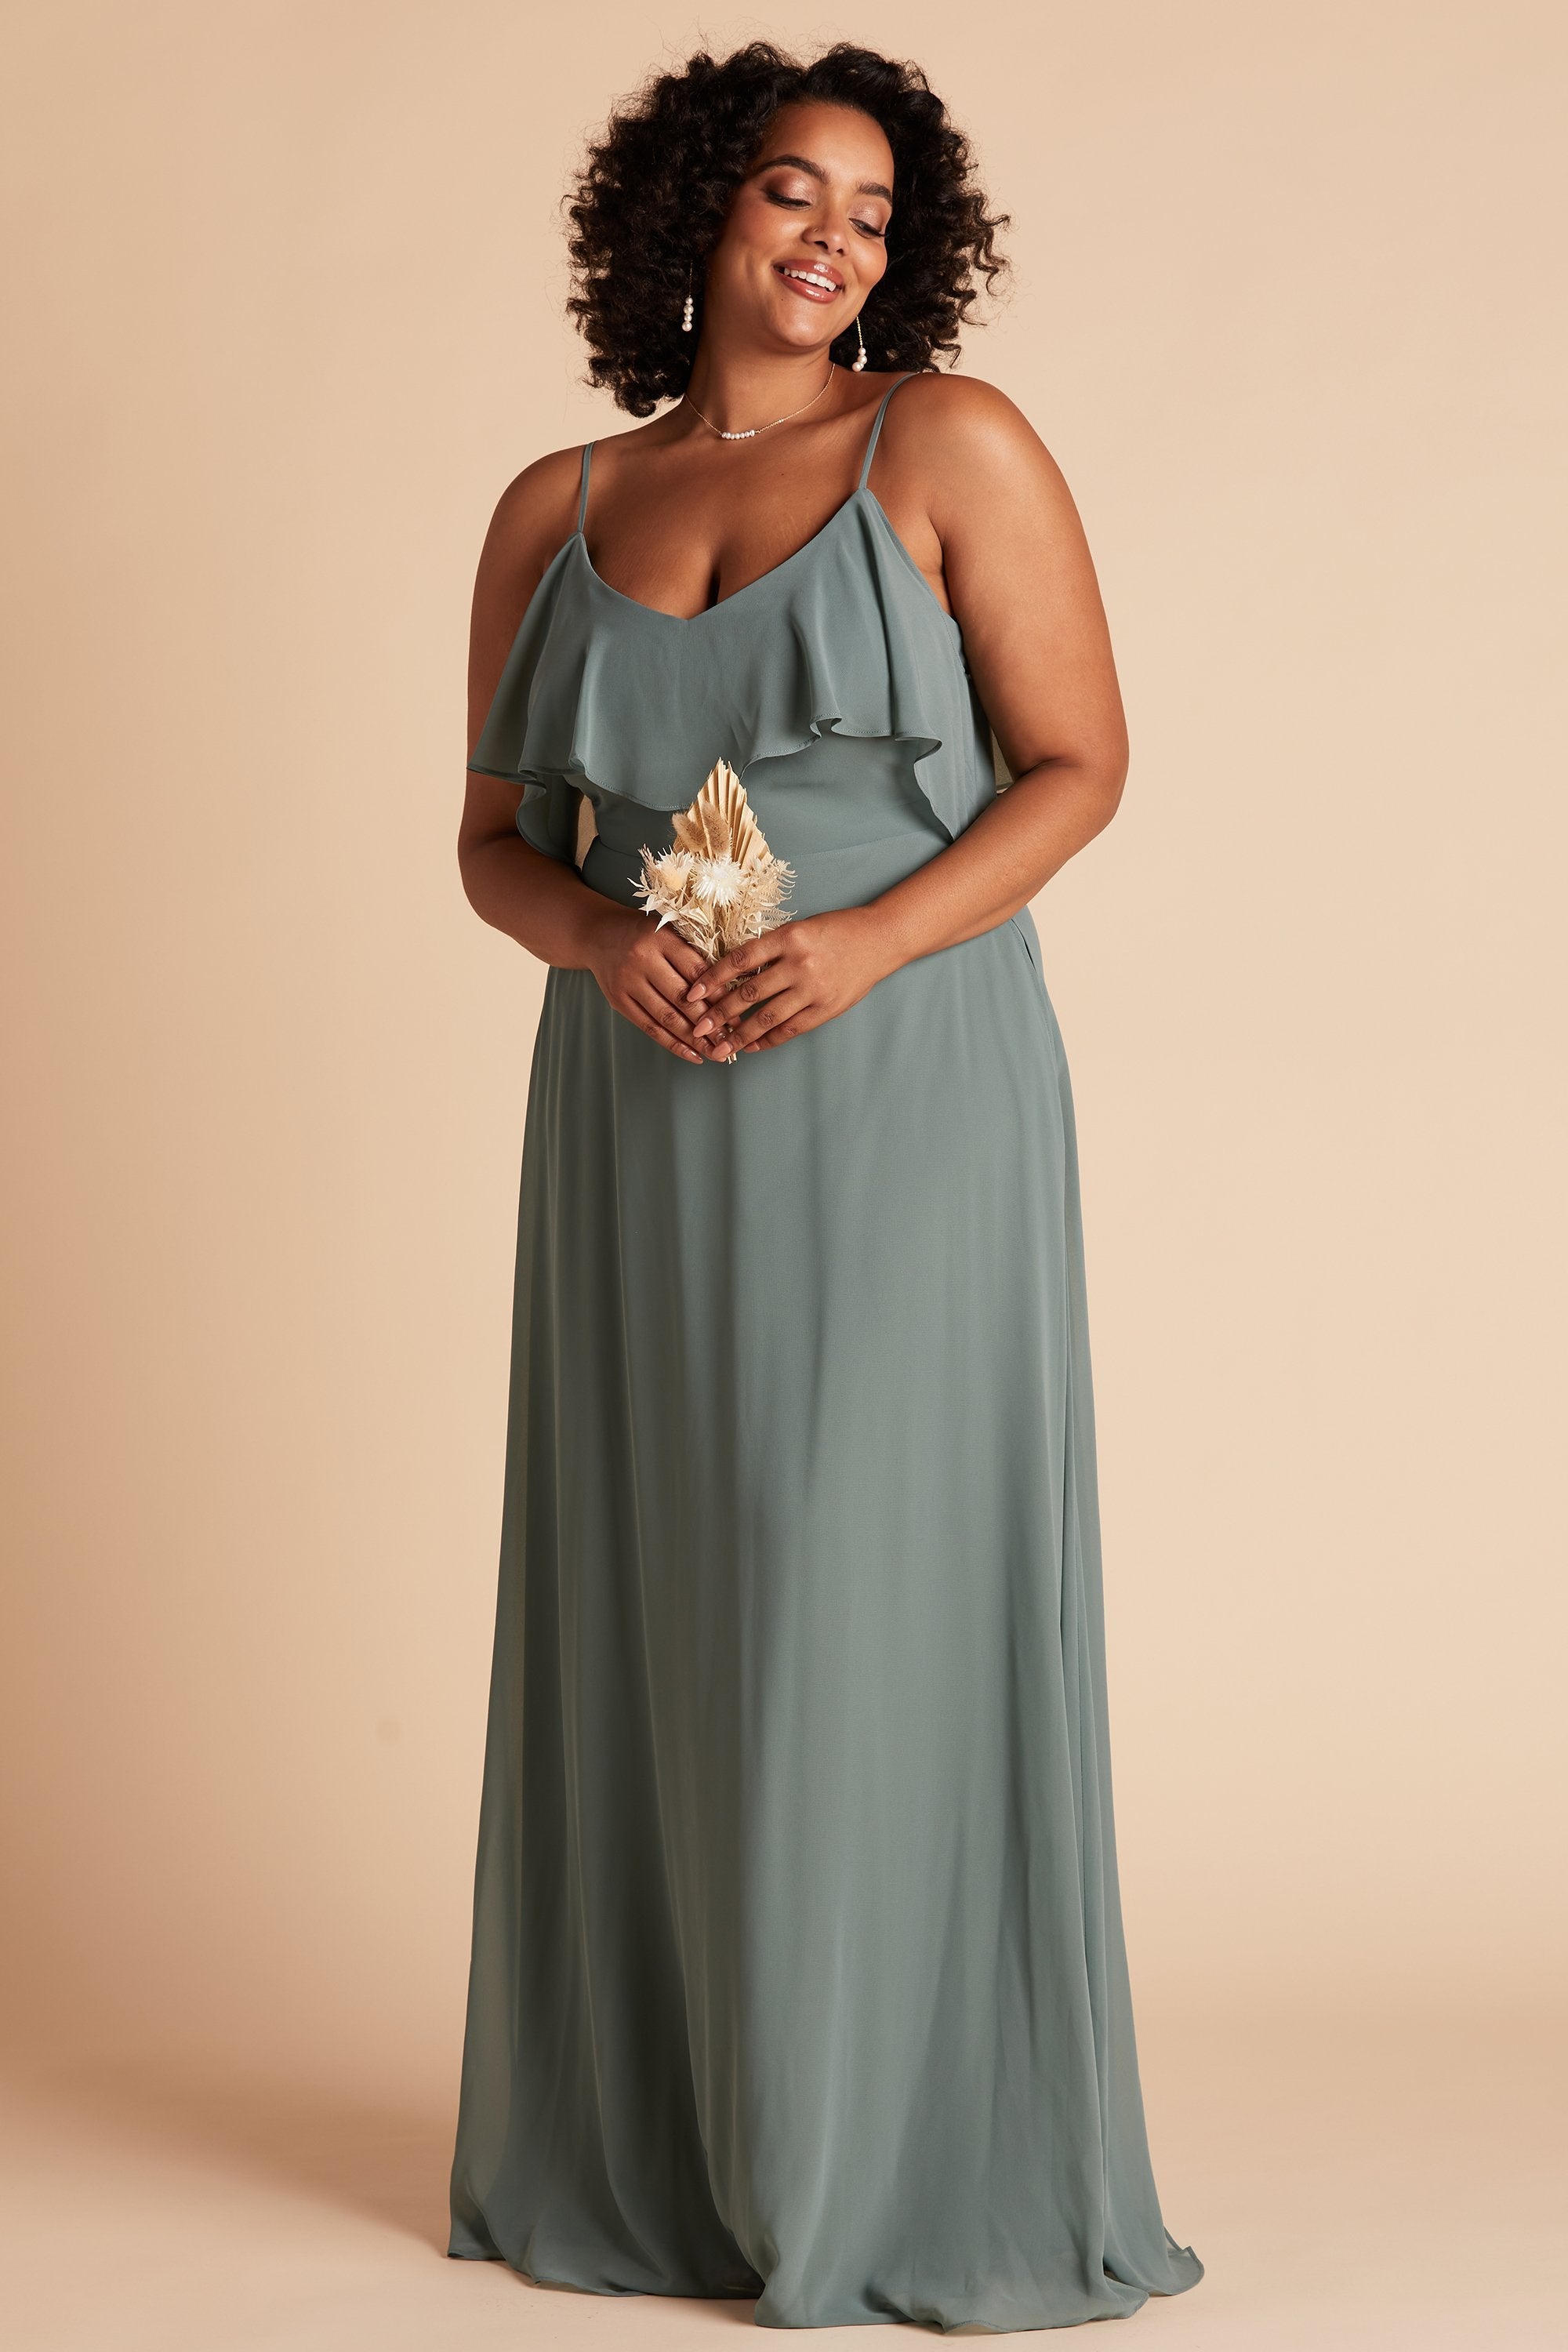 Jane convertible plus size bridesmaid dress in sea glass green chiffon by Birdy Grey, front view